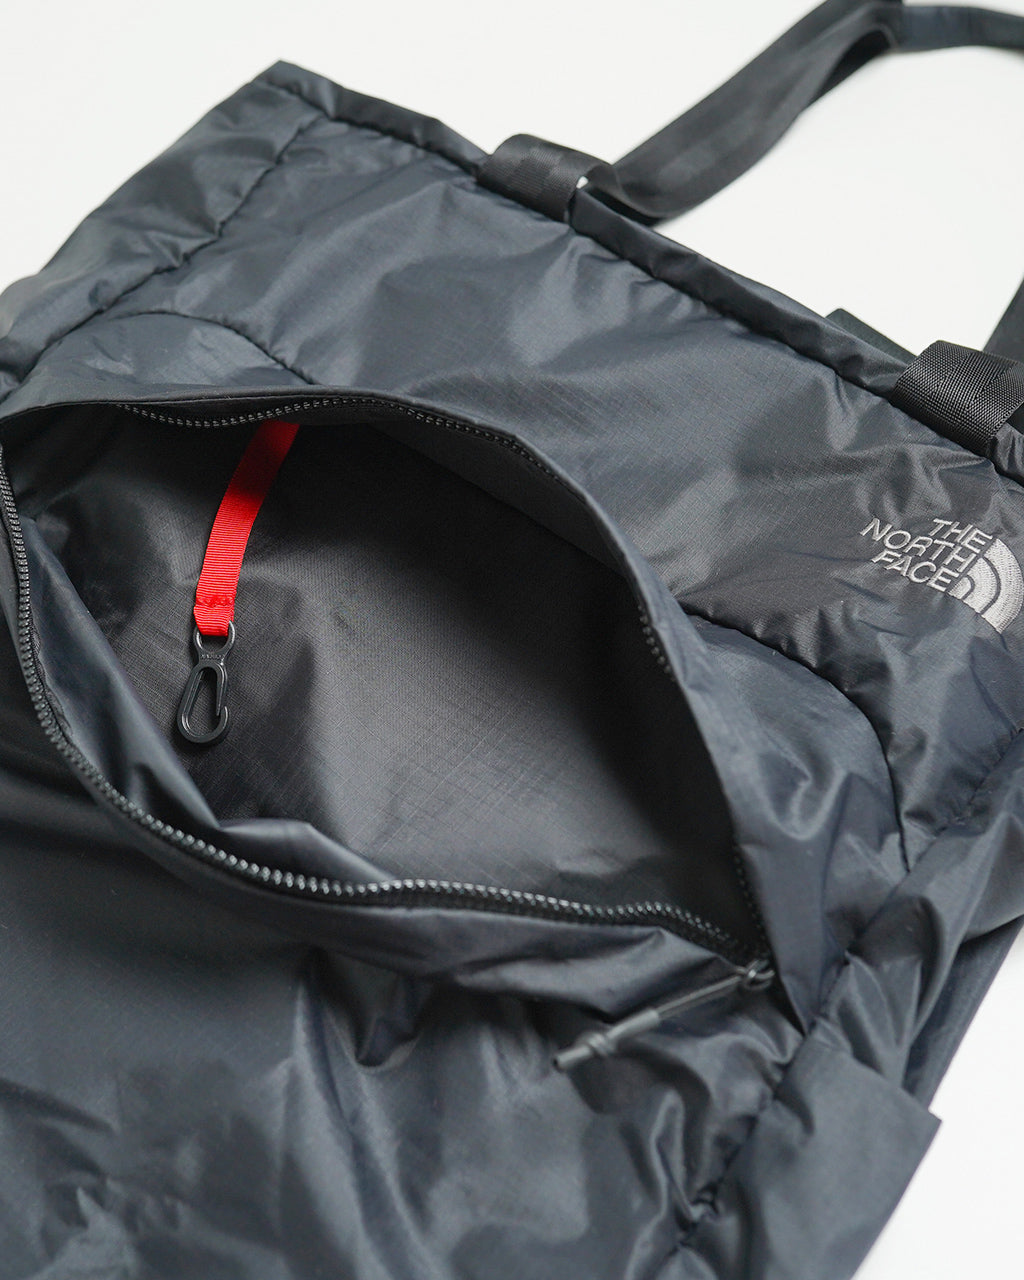 THE NORTH FACE ノースフェイス グラム トート Glam Tote 2way トートバッグ バックパック リュックサック 18L   NM32359【送料無料】